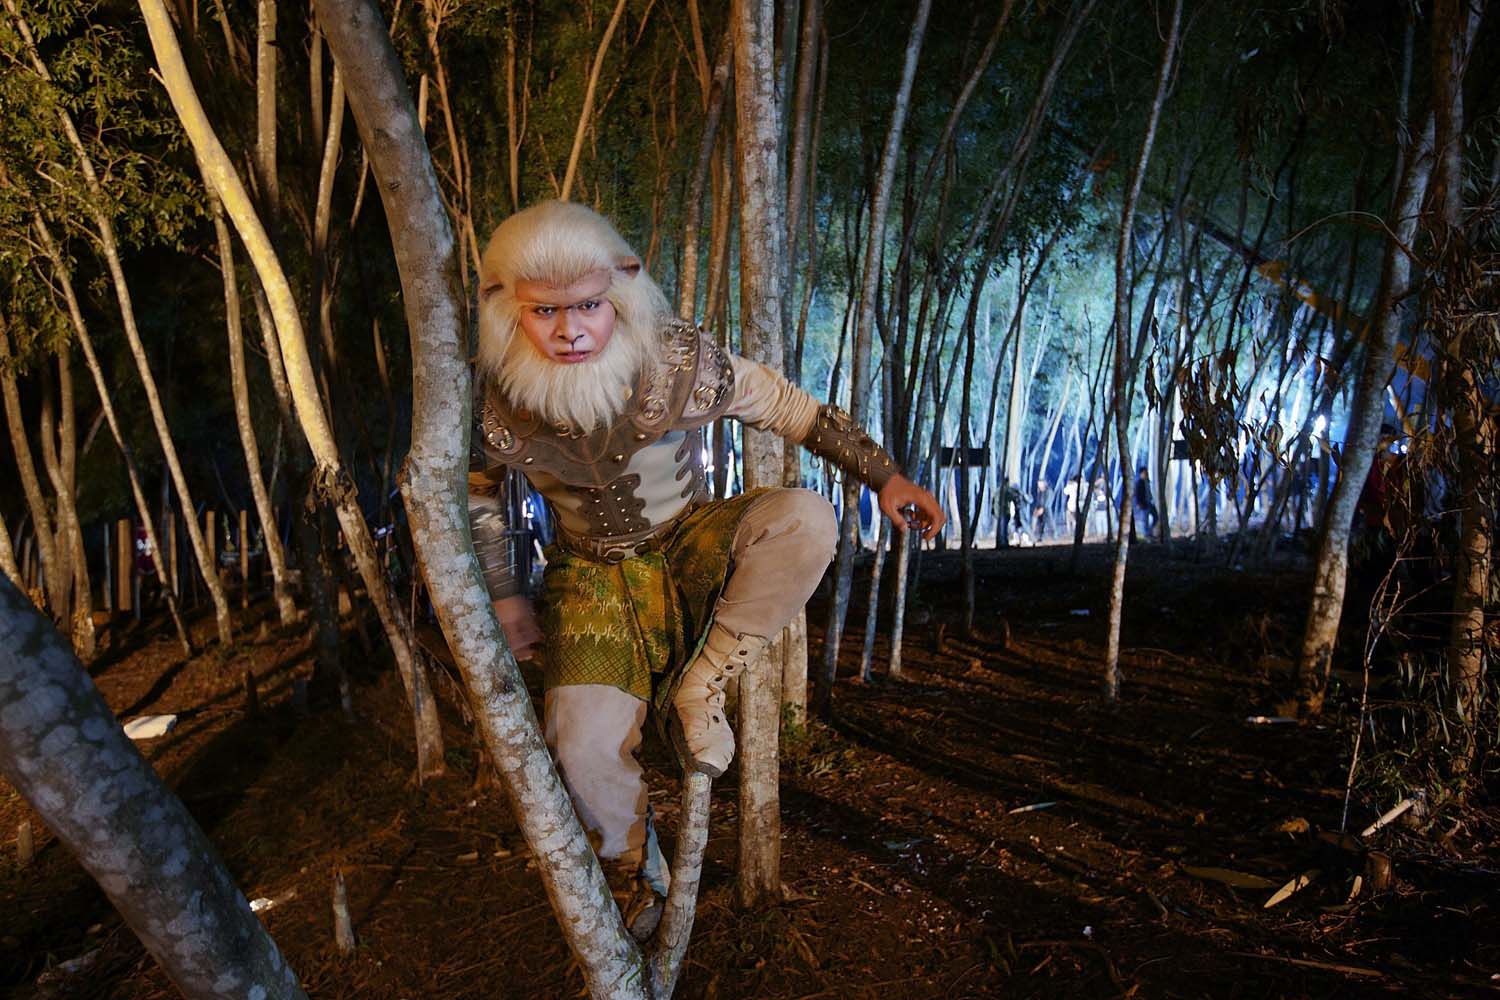 Oct. 21, 2013. An actor performing as the one of the title characters,  Ciung, half man, half monkey is seen during  the production of Ciung Wanara, one of the many Indonesian soap operas based on traditional Indonesian legends in Cileungsi, Indonesia.